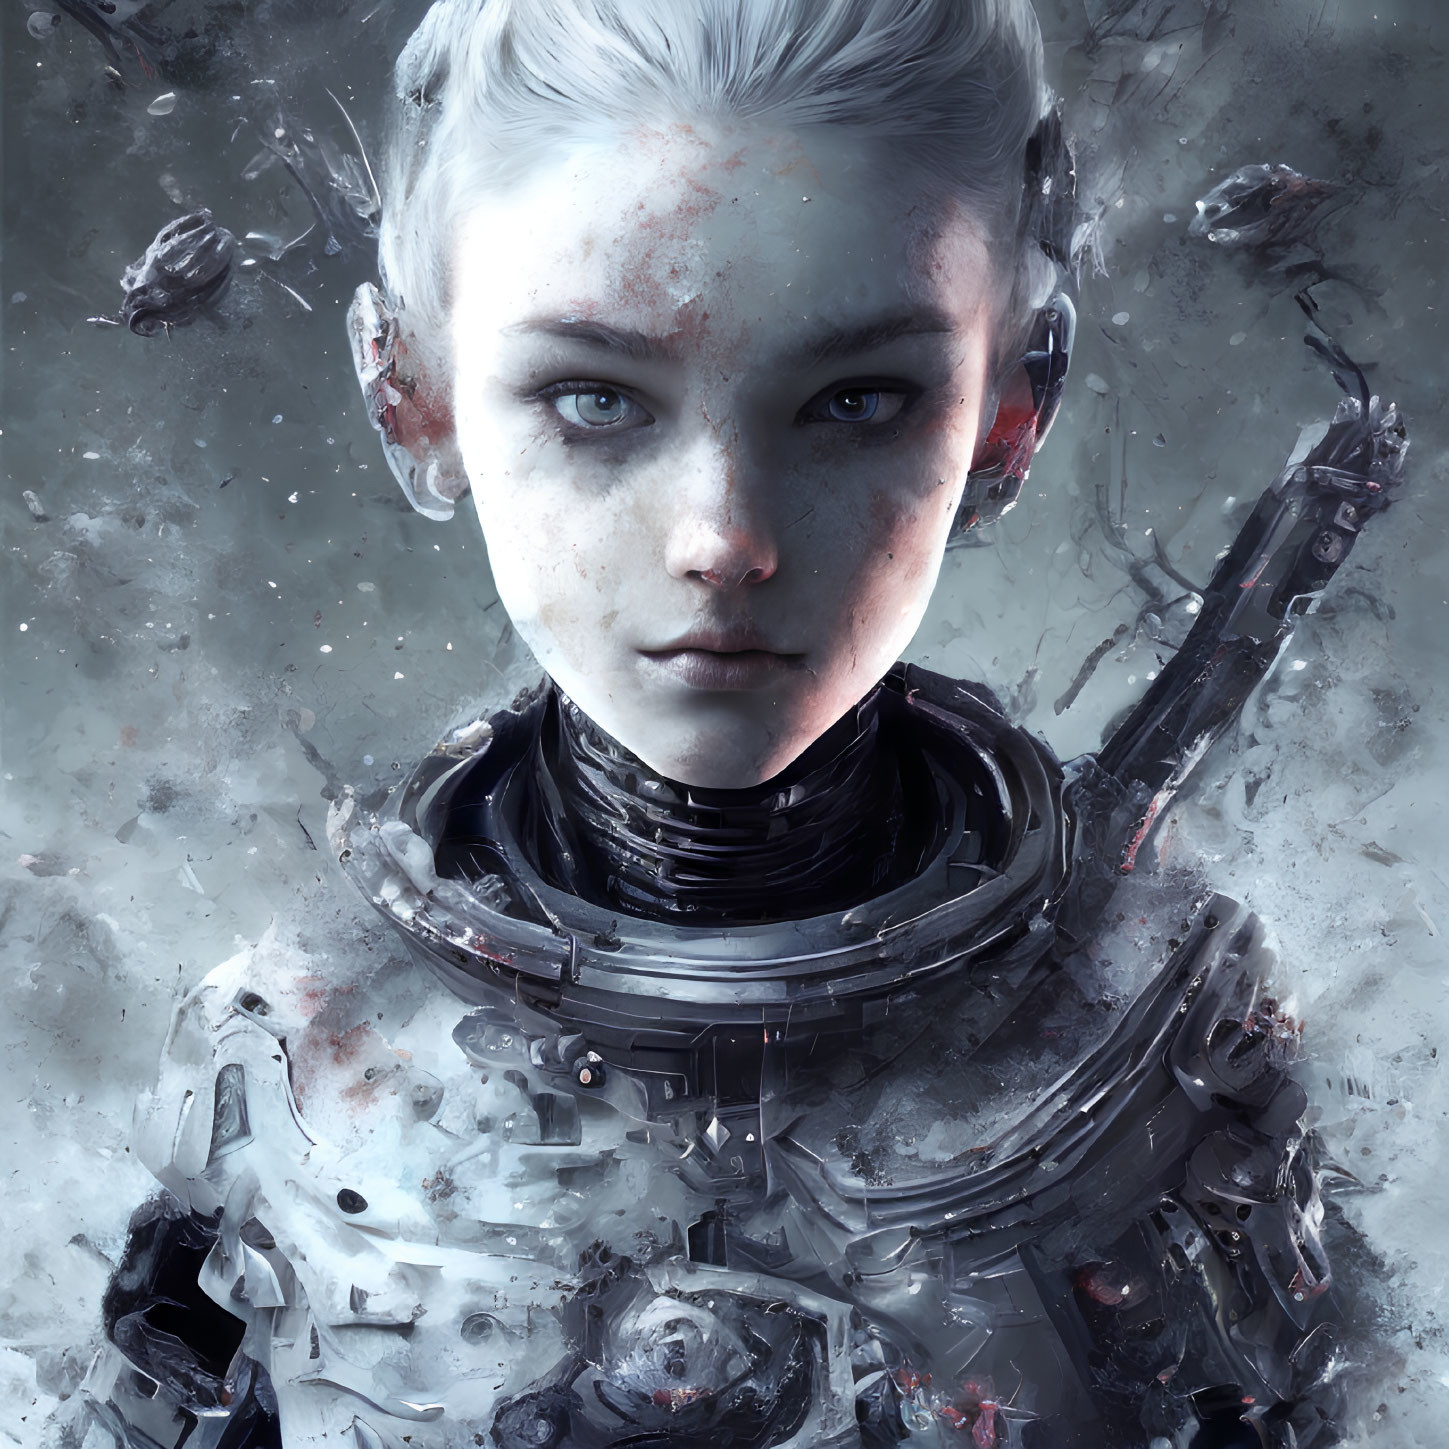 Digital artwork: Young person with blue eyes, white hair, futuristic armor in debris.